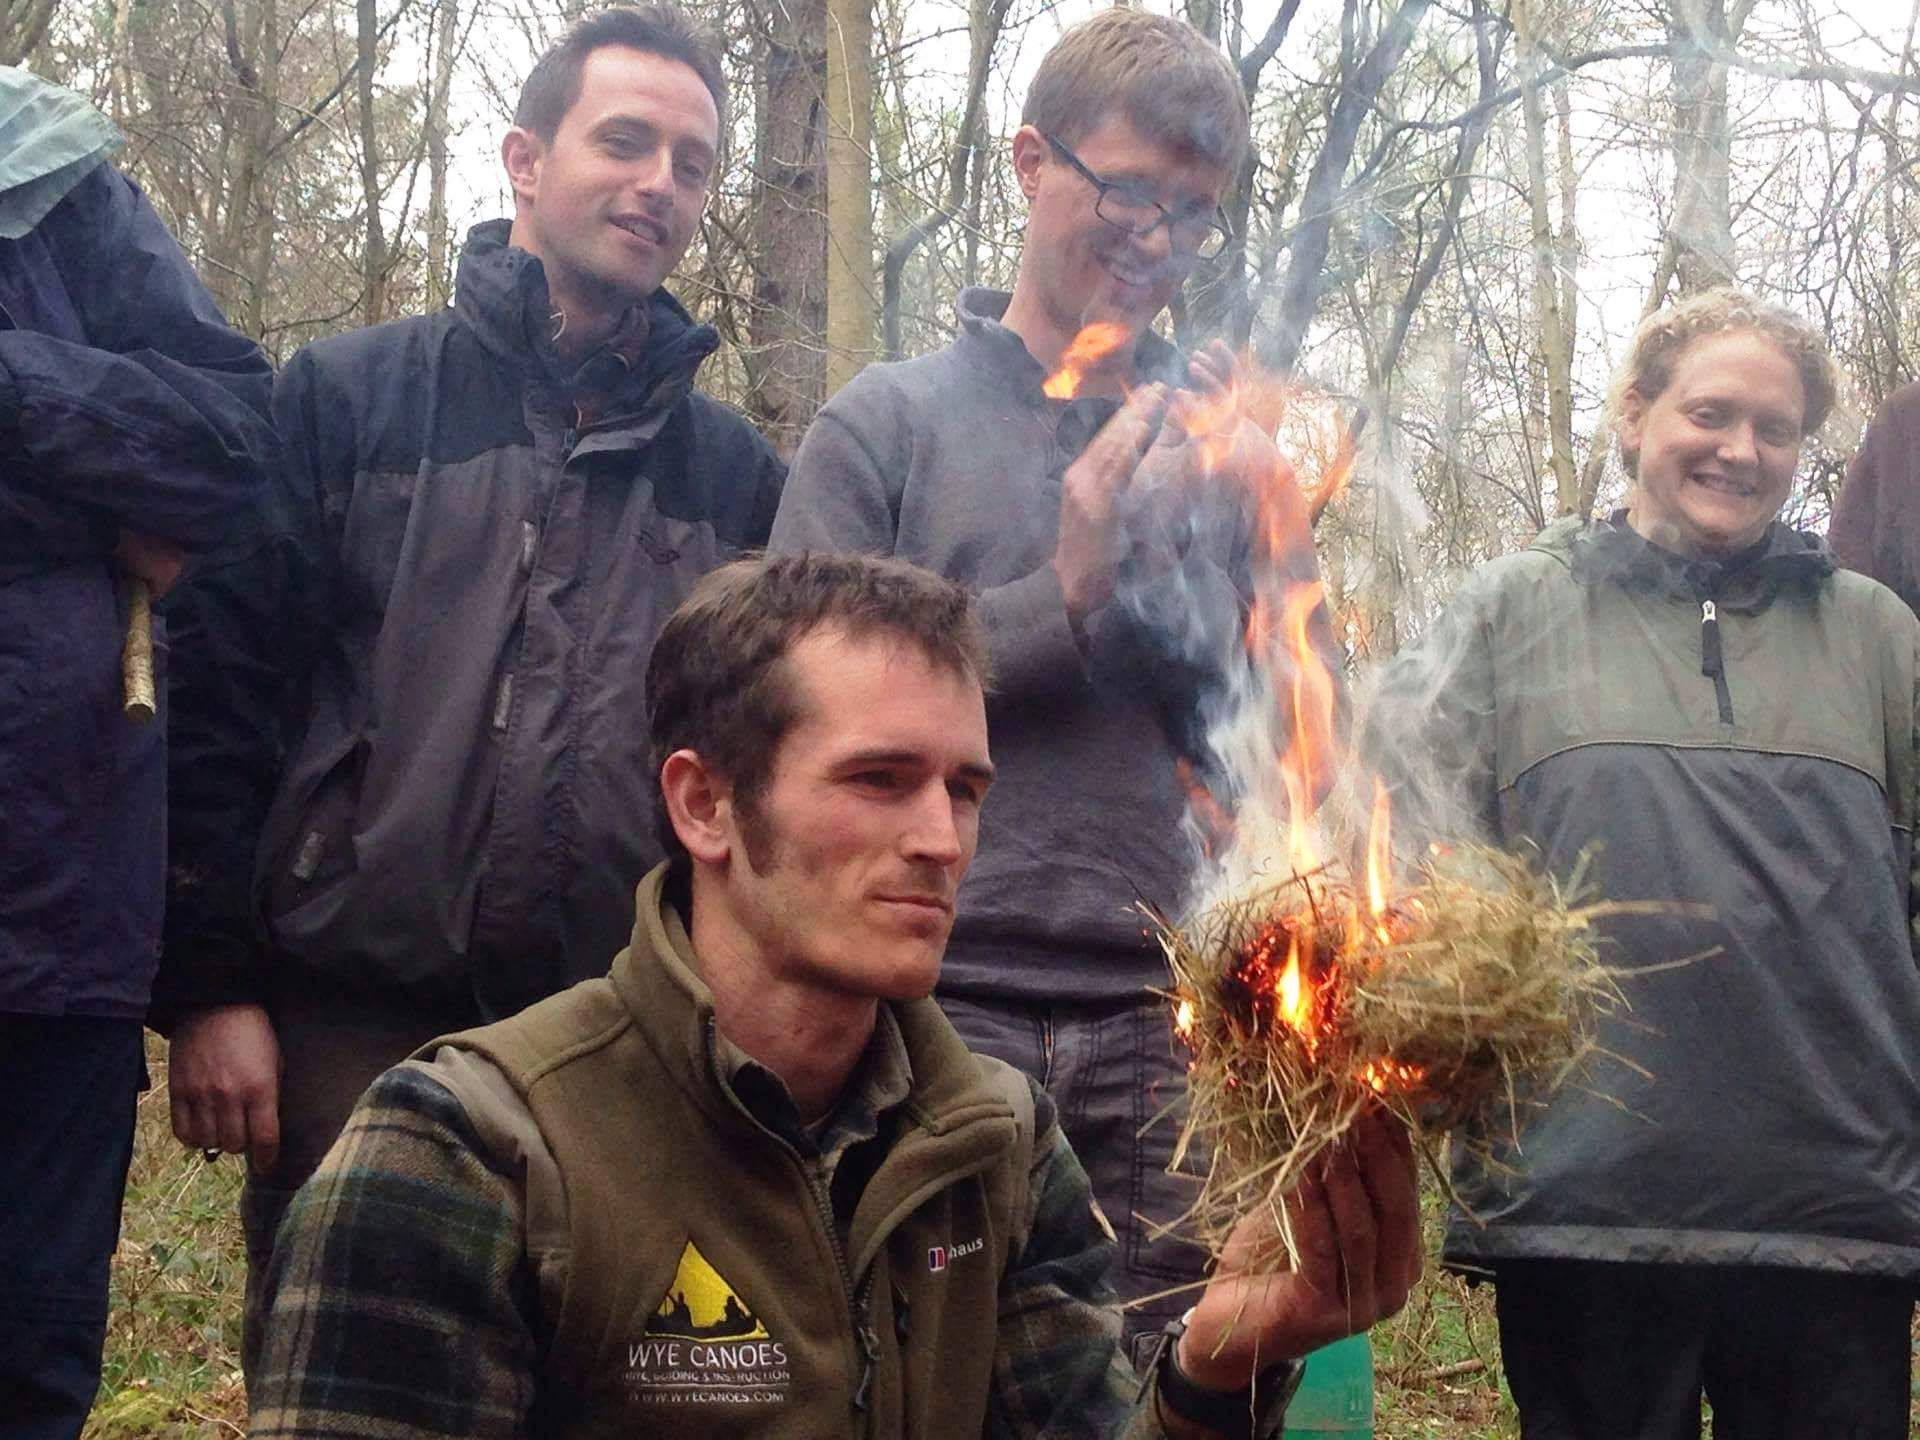 Fire by friction demonstration